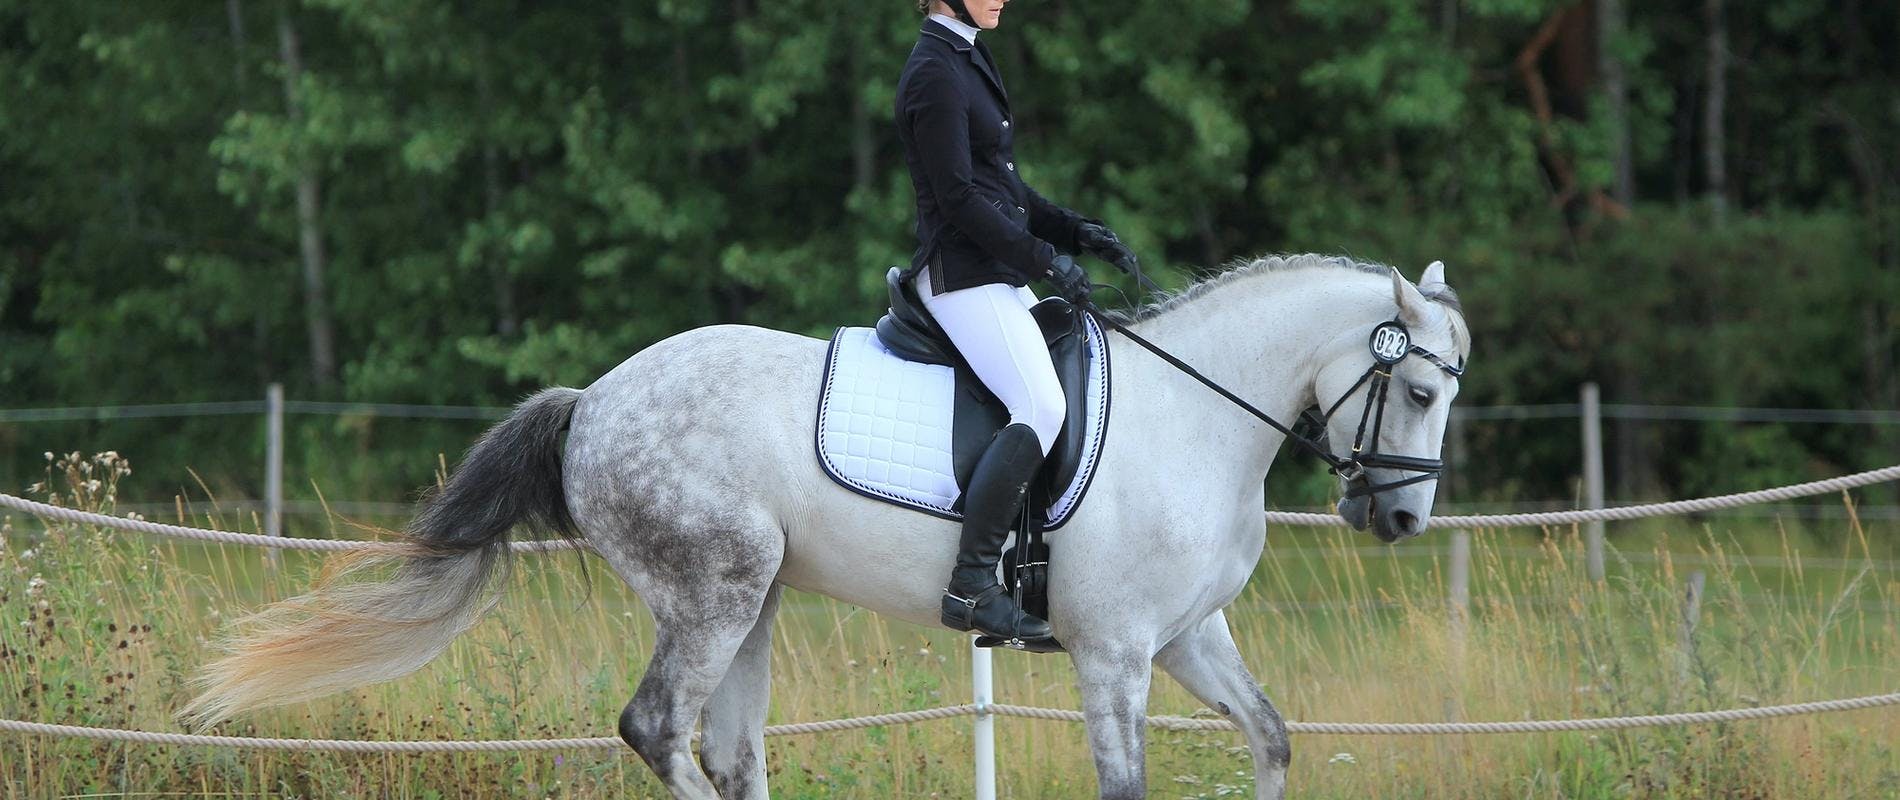 grey horse cantering in dressage ring